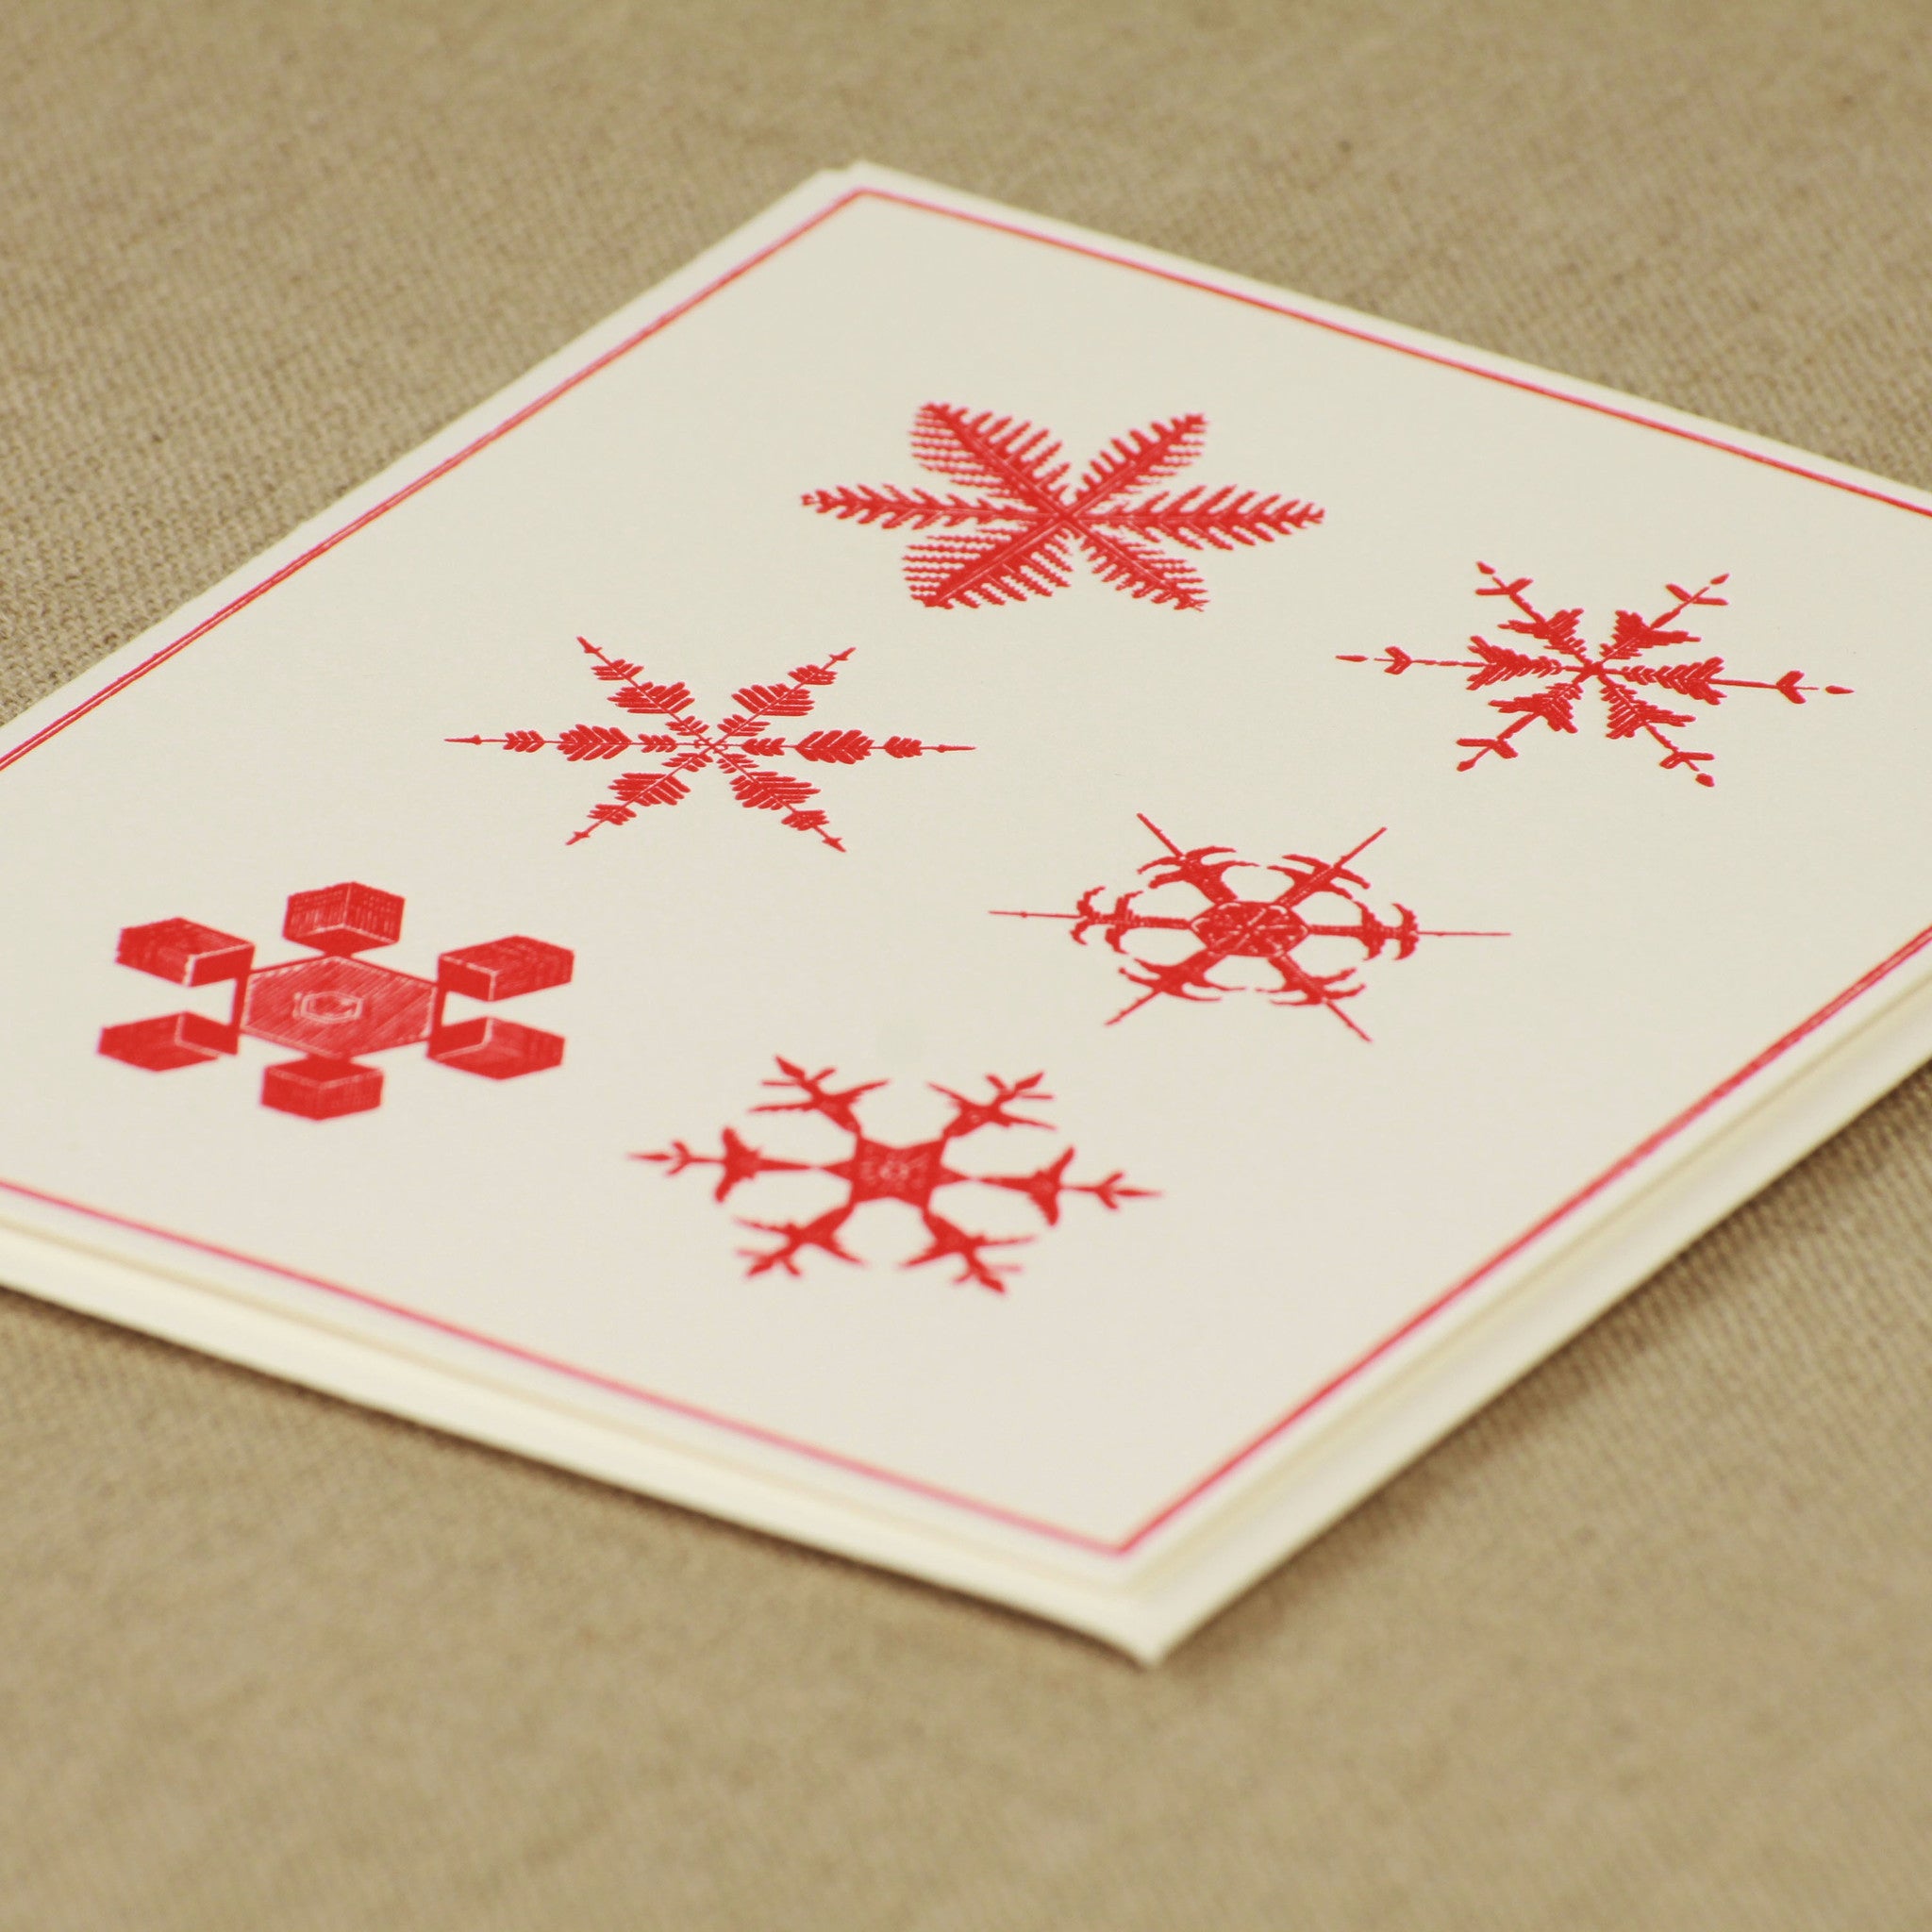 Early Snowflake Drawing #3